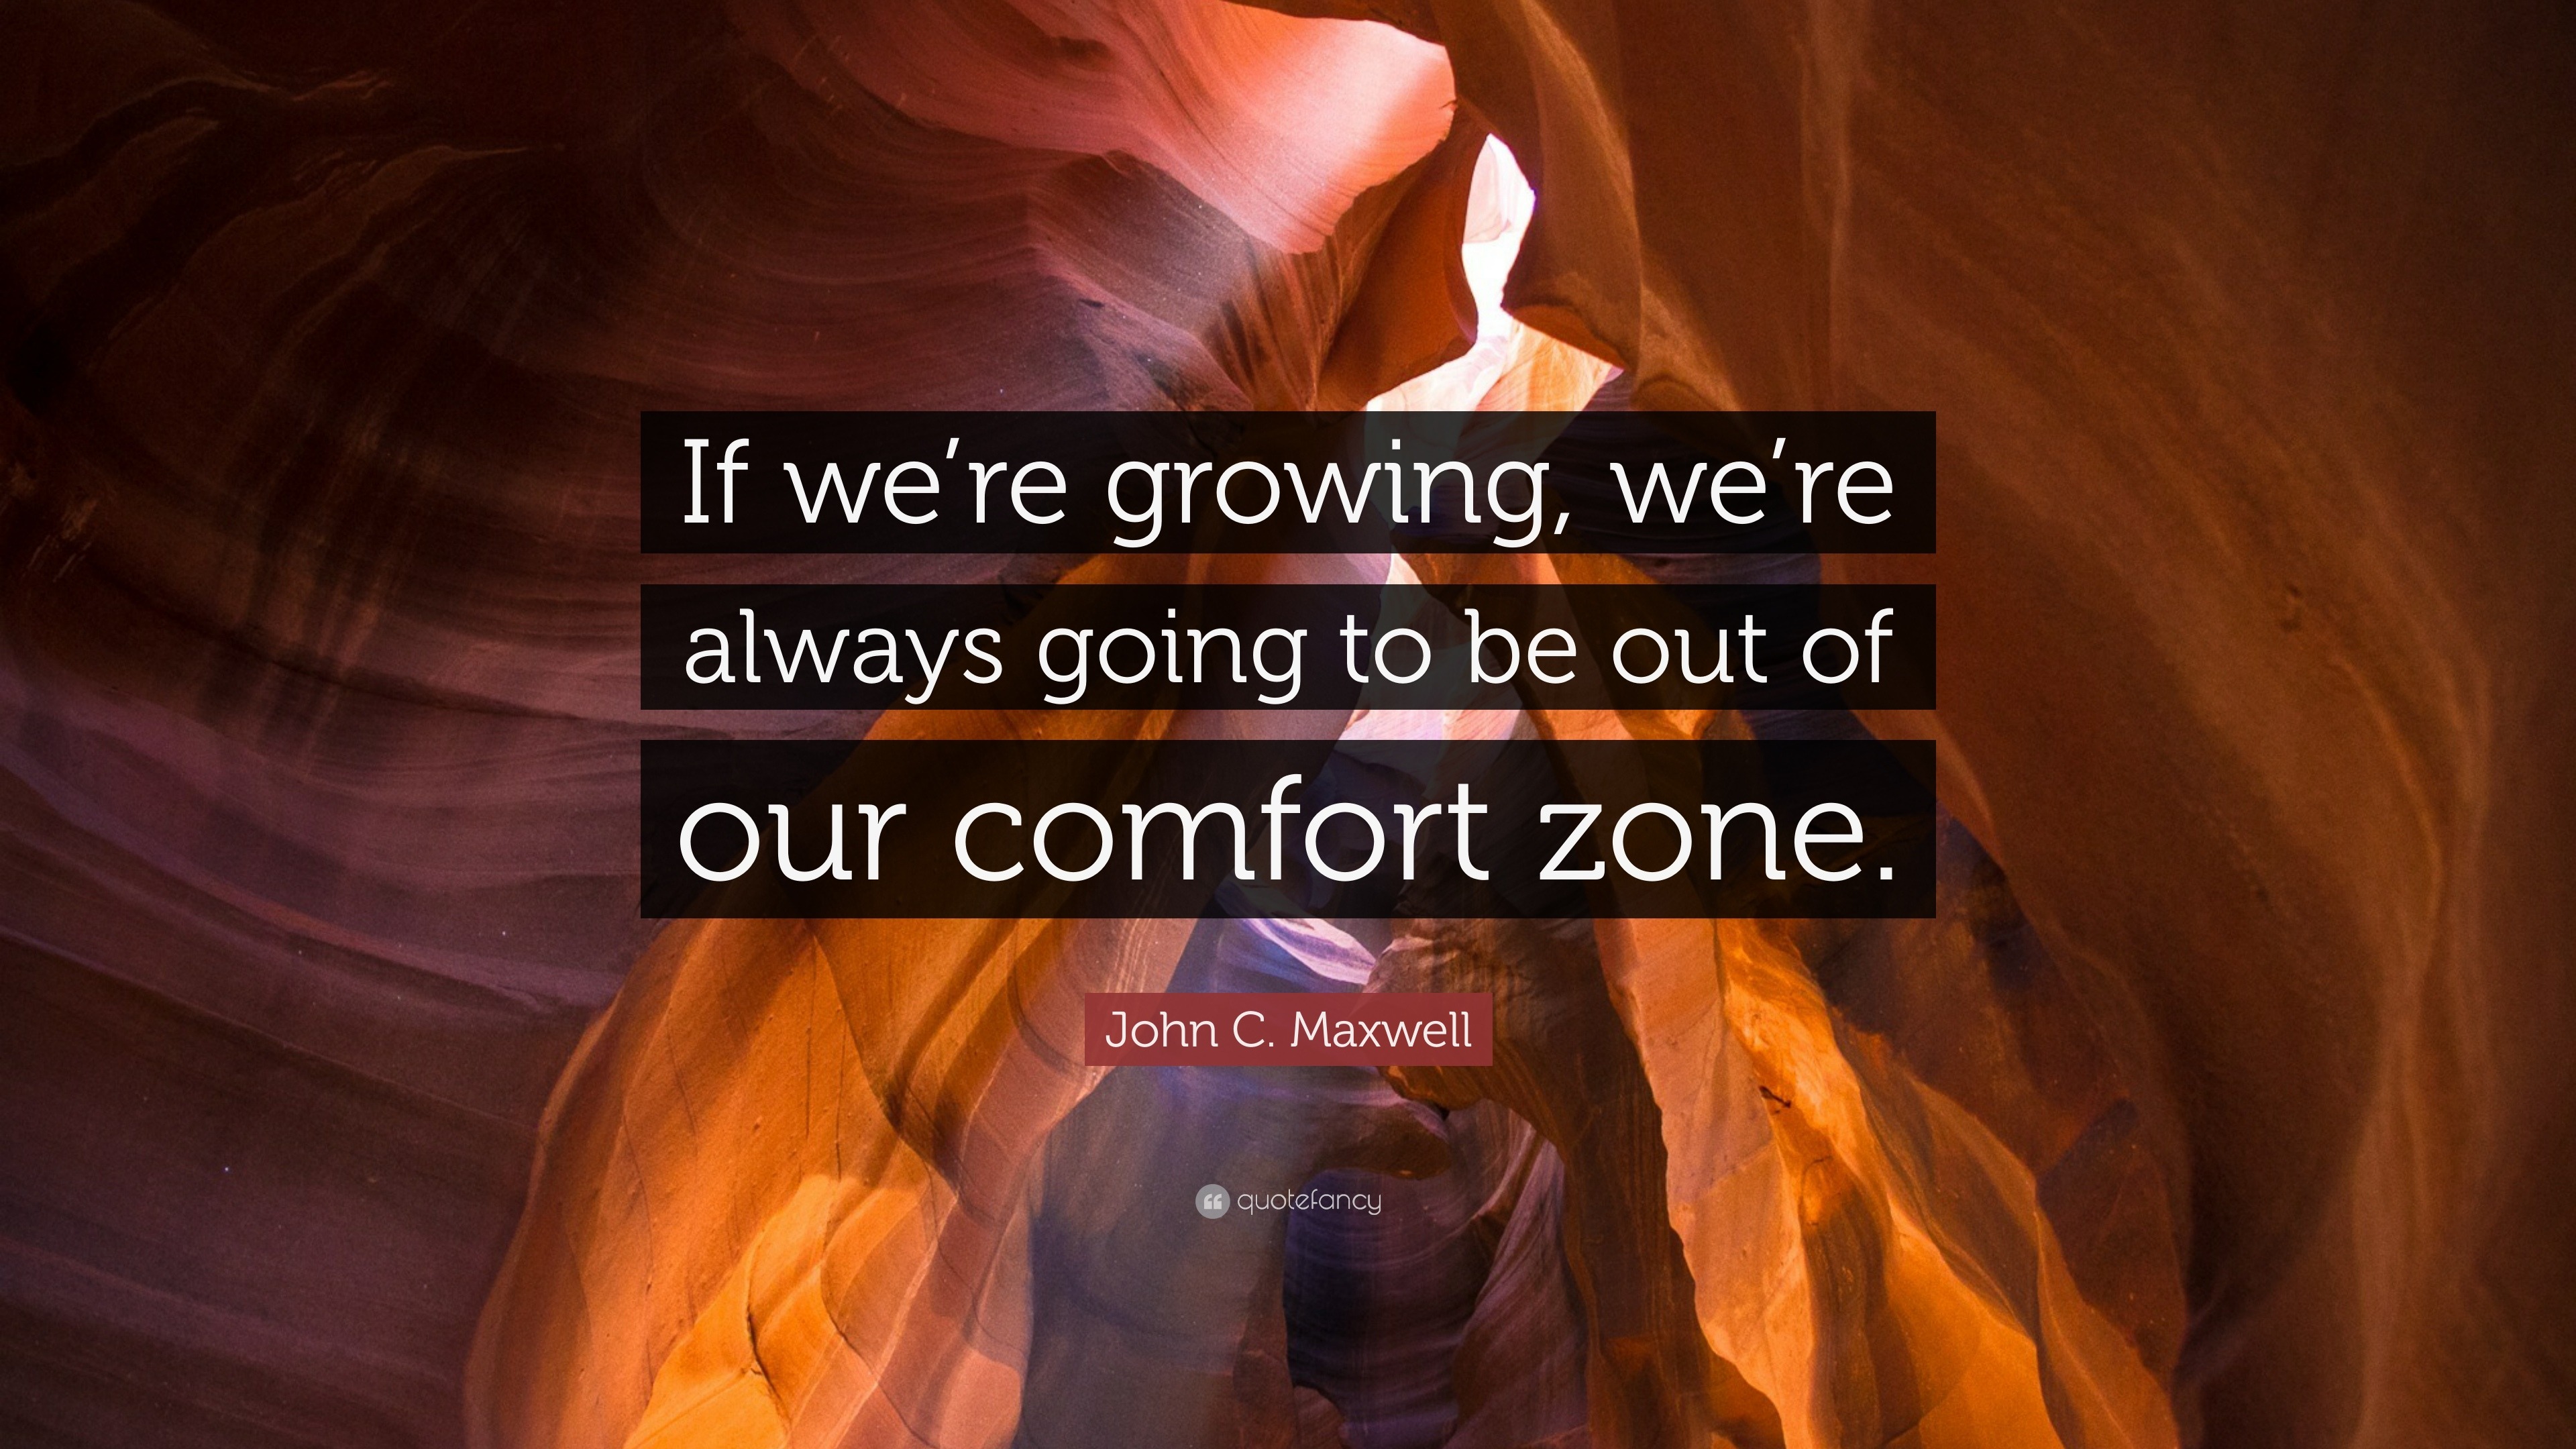 It's Not Always About Getting Out of Your Comfort Zone – Our Next